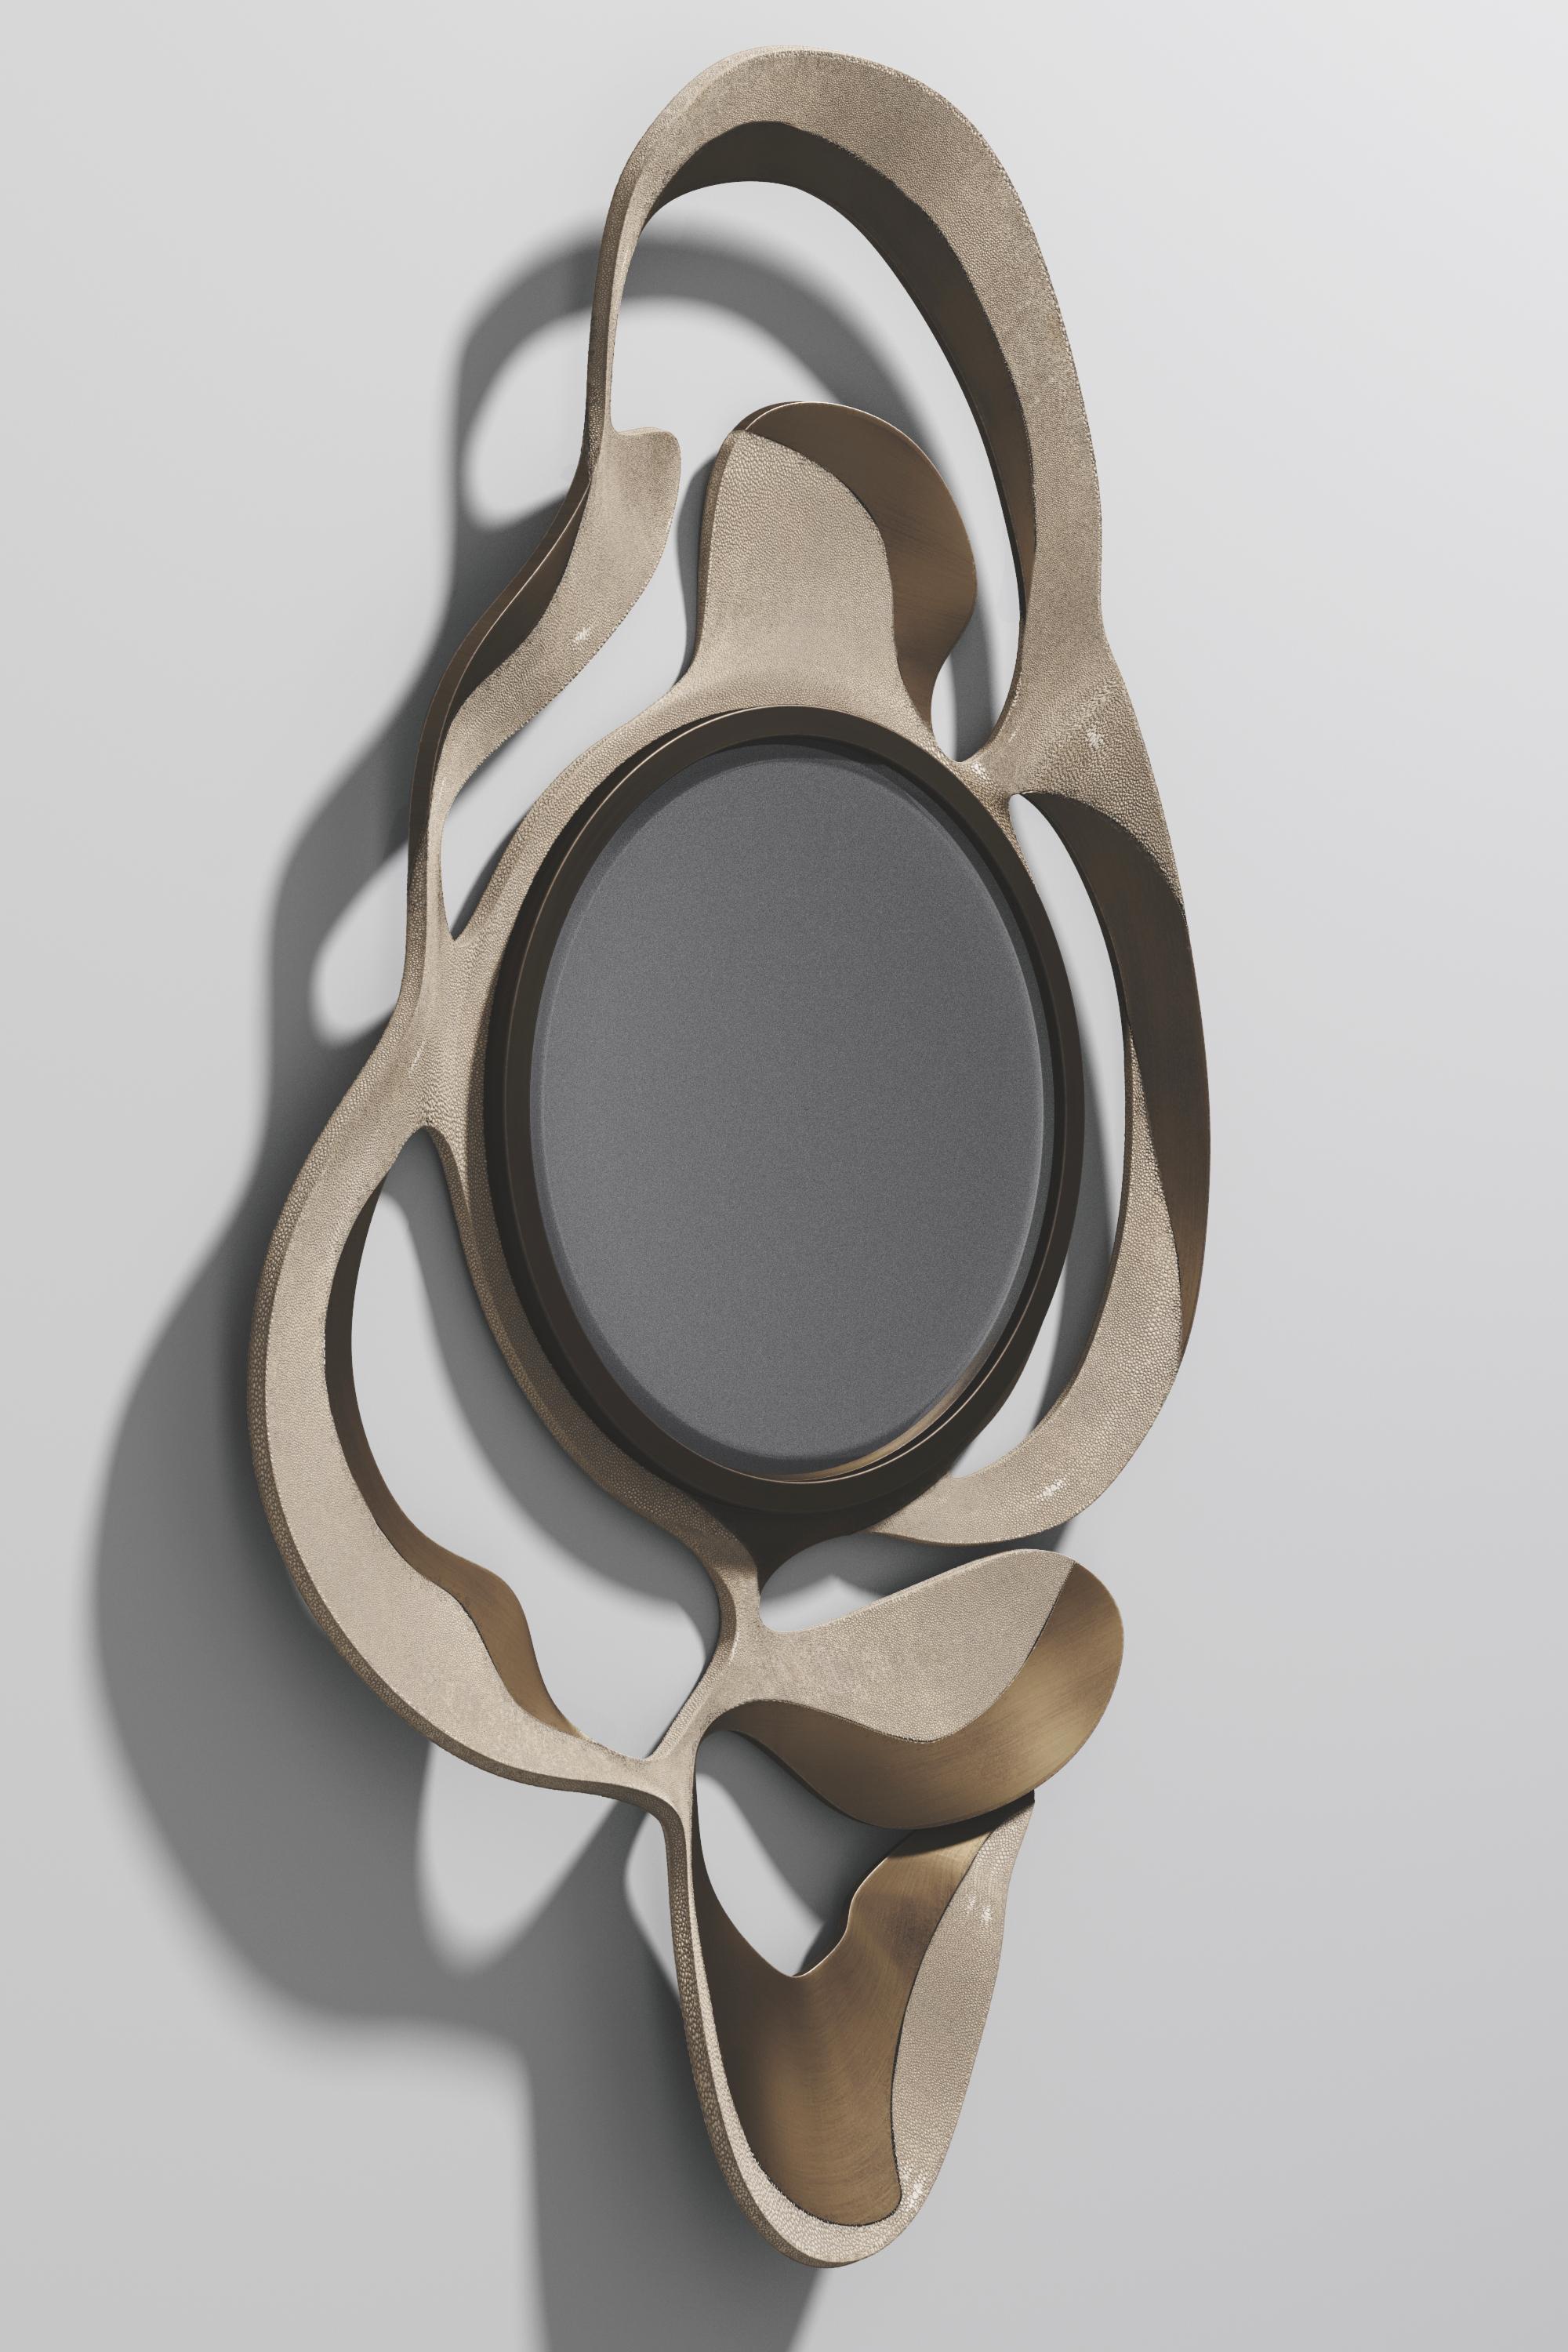 Contemporary Shell Inlaid Mirror with Bronze Patina Brass Details by Kifu Paris For Sale